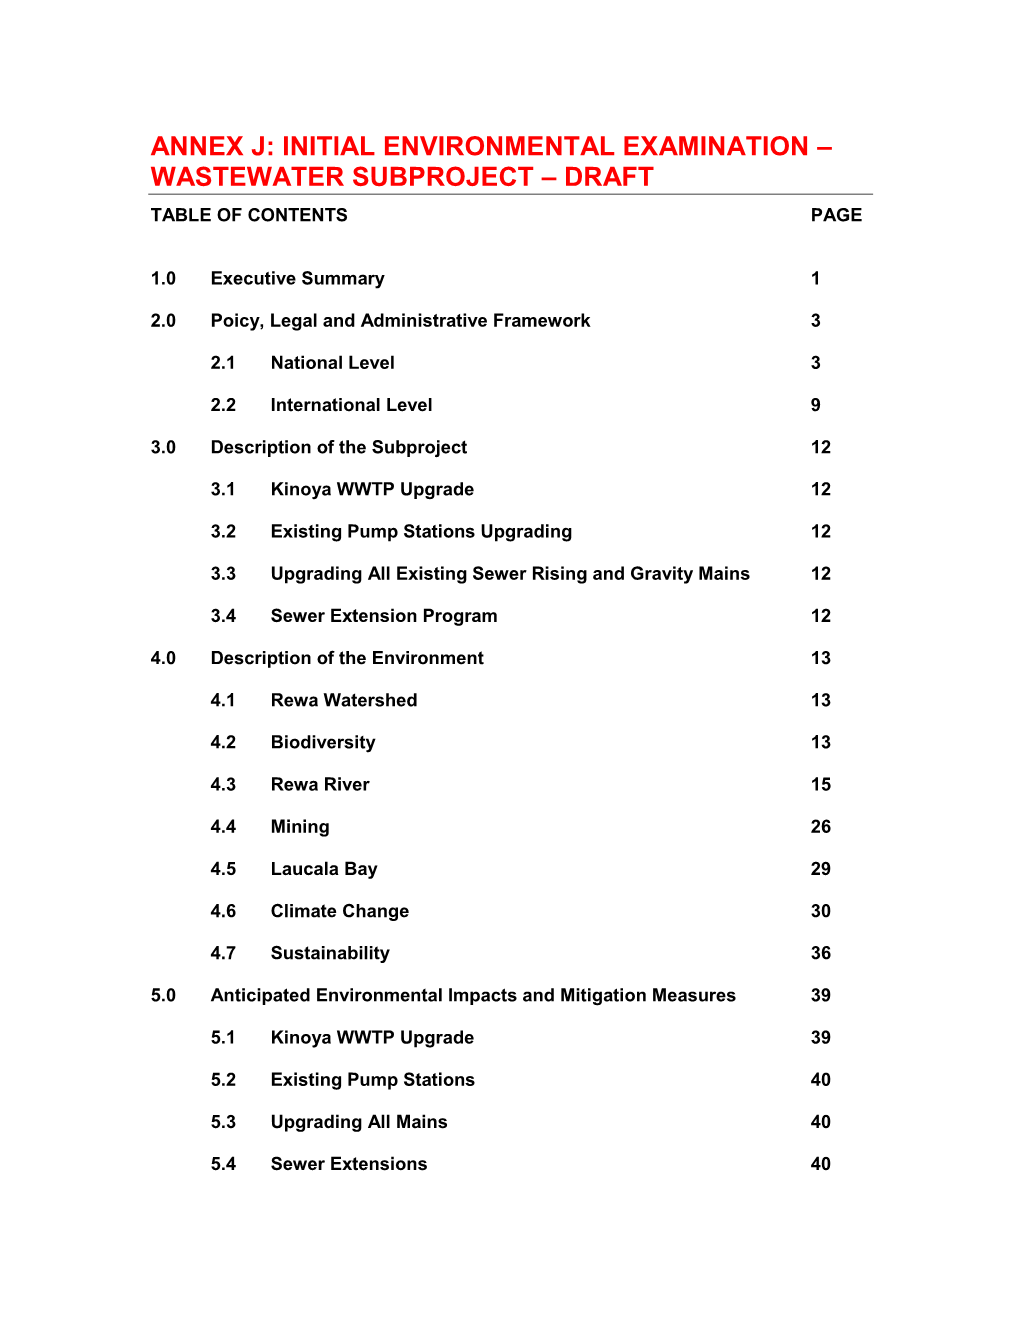 Annex J: Initial Environmental Examination – Wastewater Subproject – Draft Table of Contents Page